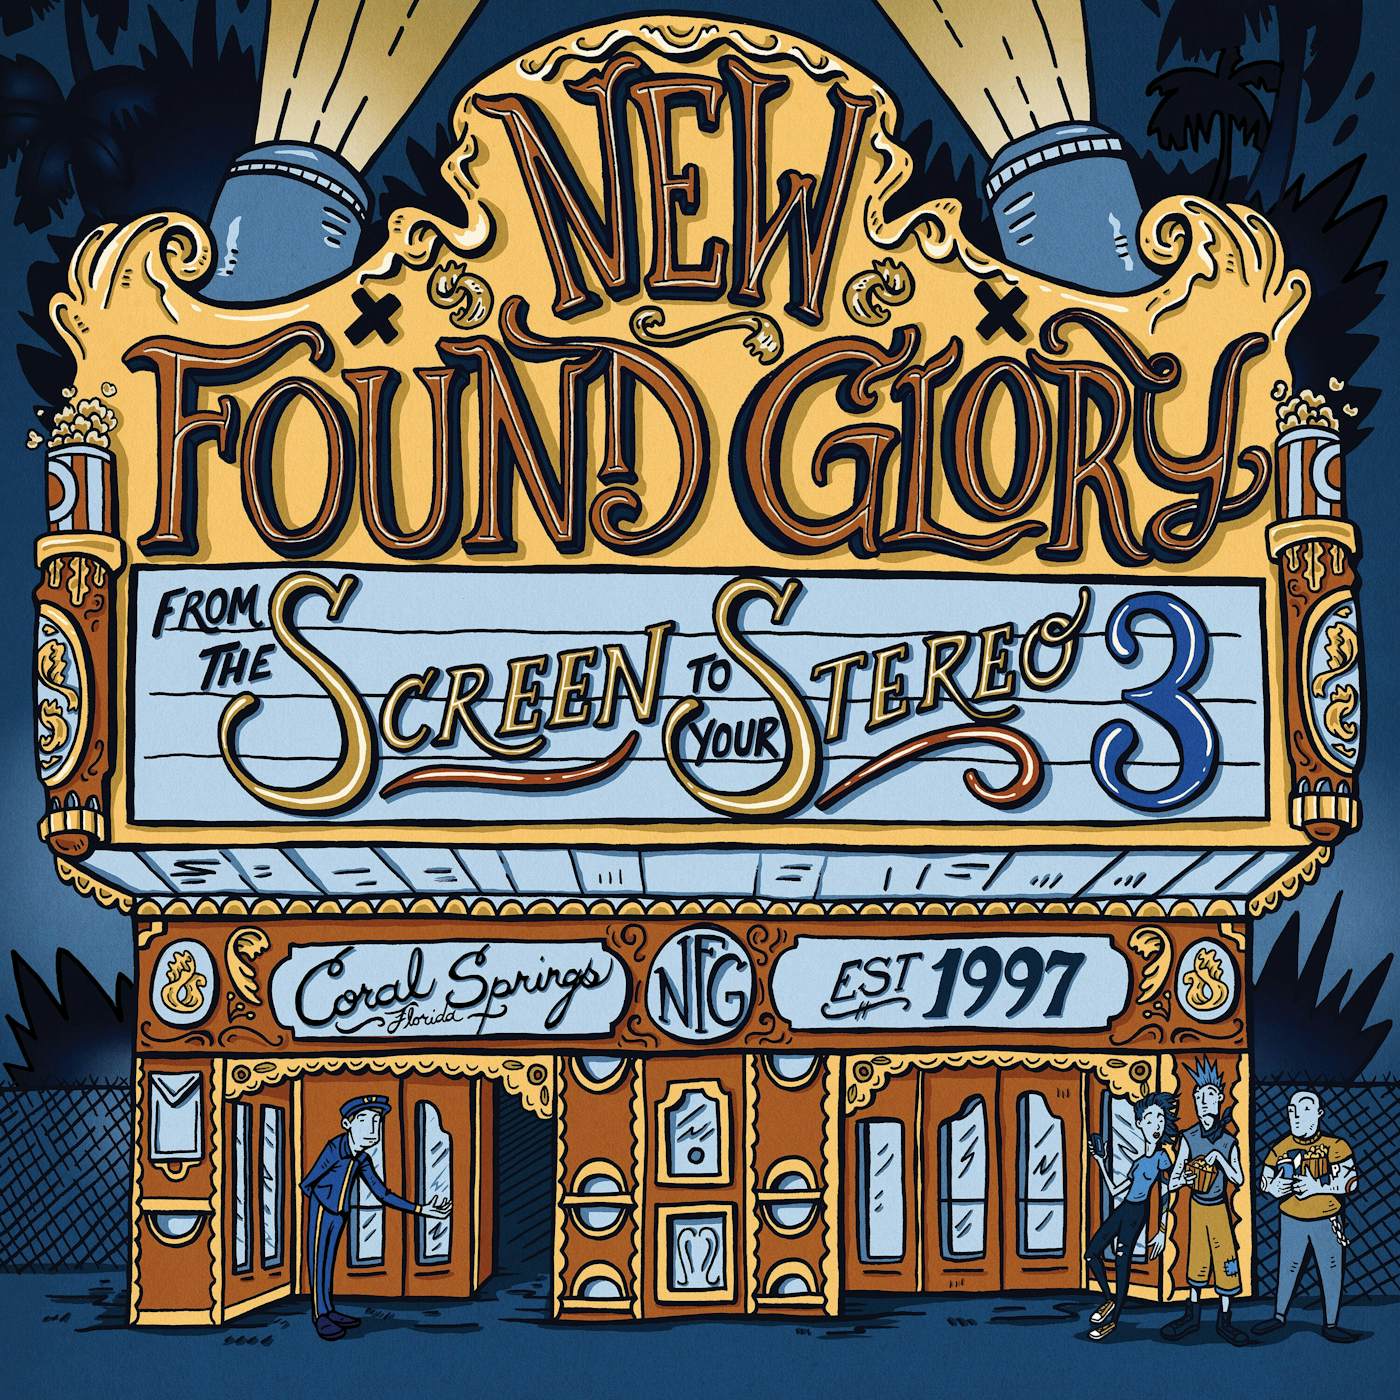 New Found Glory FROM THE SCREEN TO YOUR STEREO 3 CD